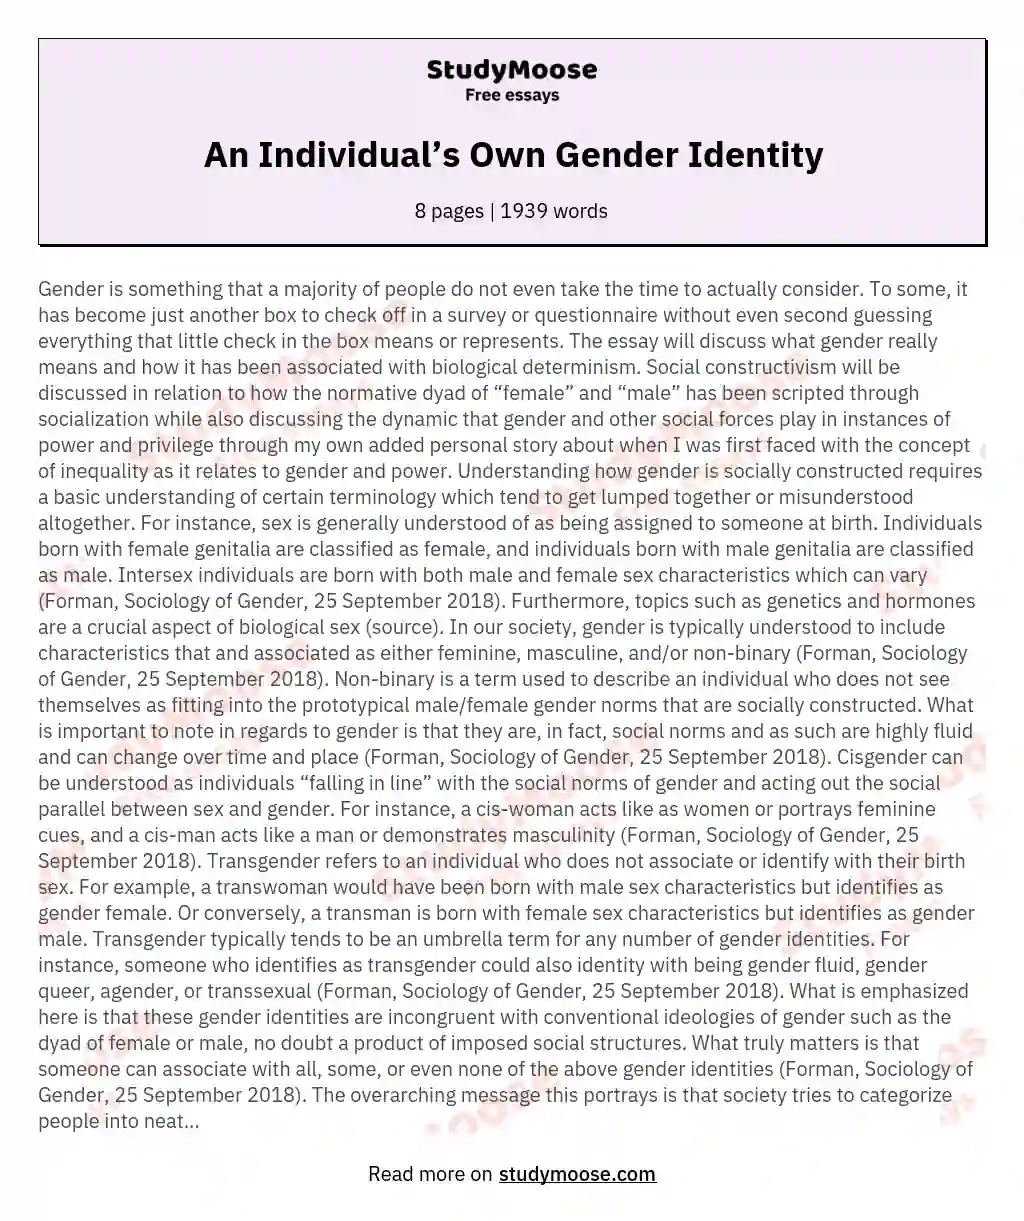 An Individual’s Own Gender Identity essay